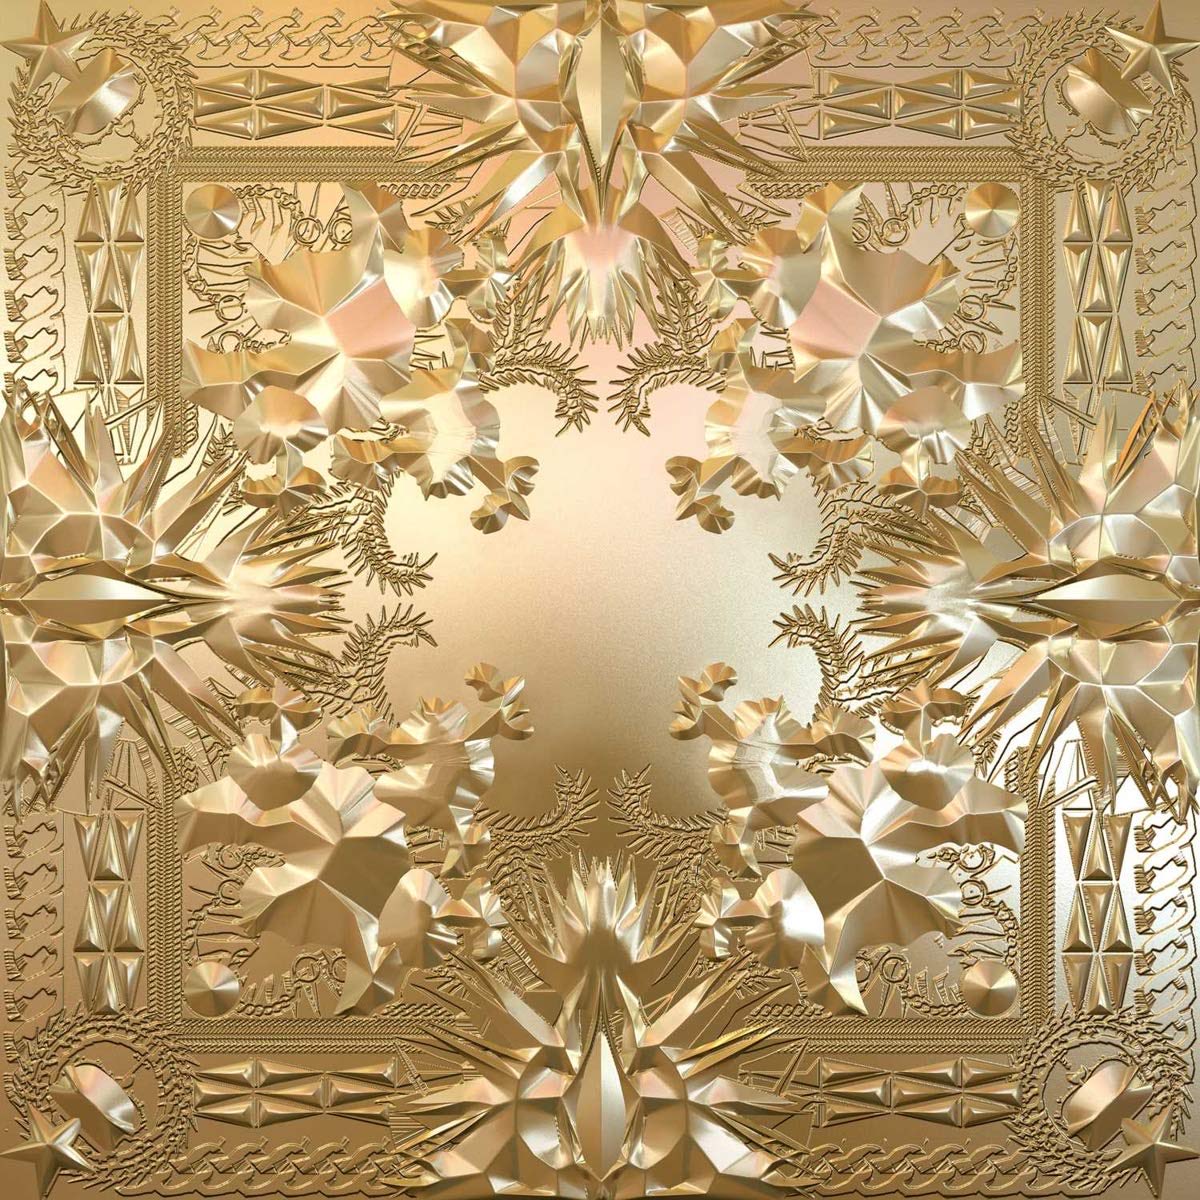 Watch The Throne: